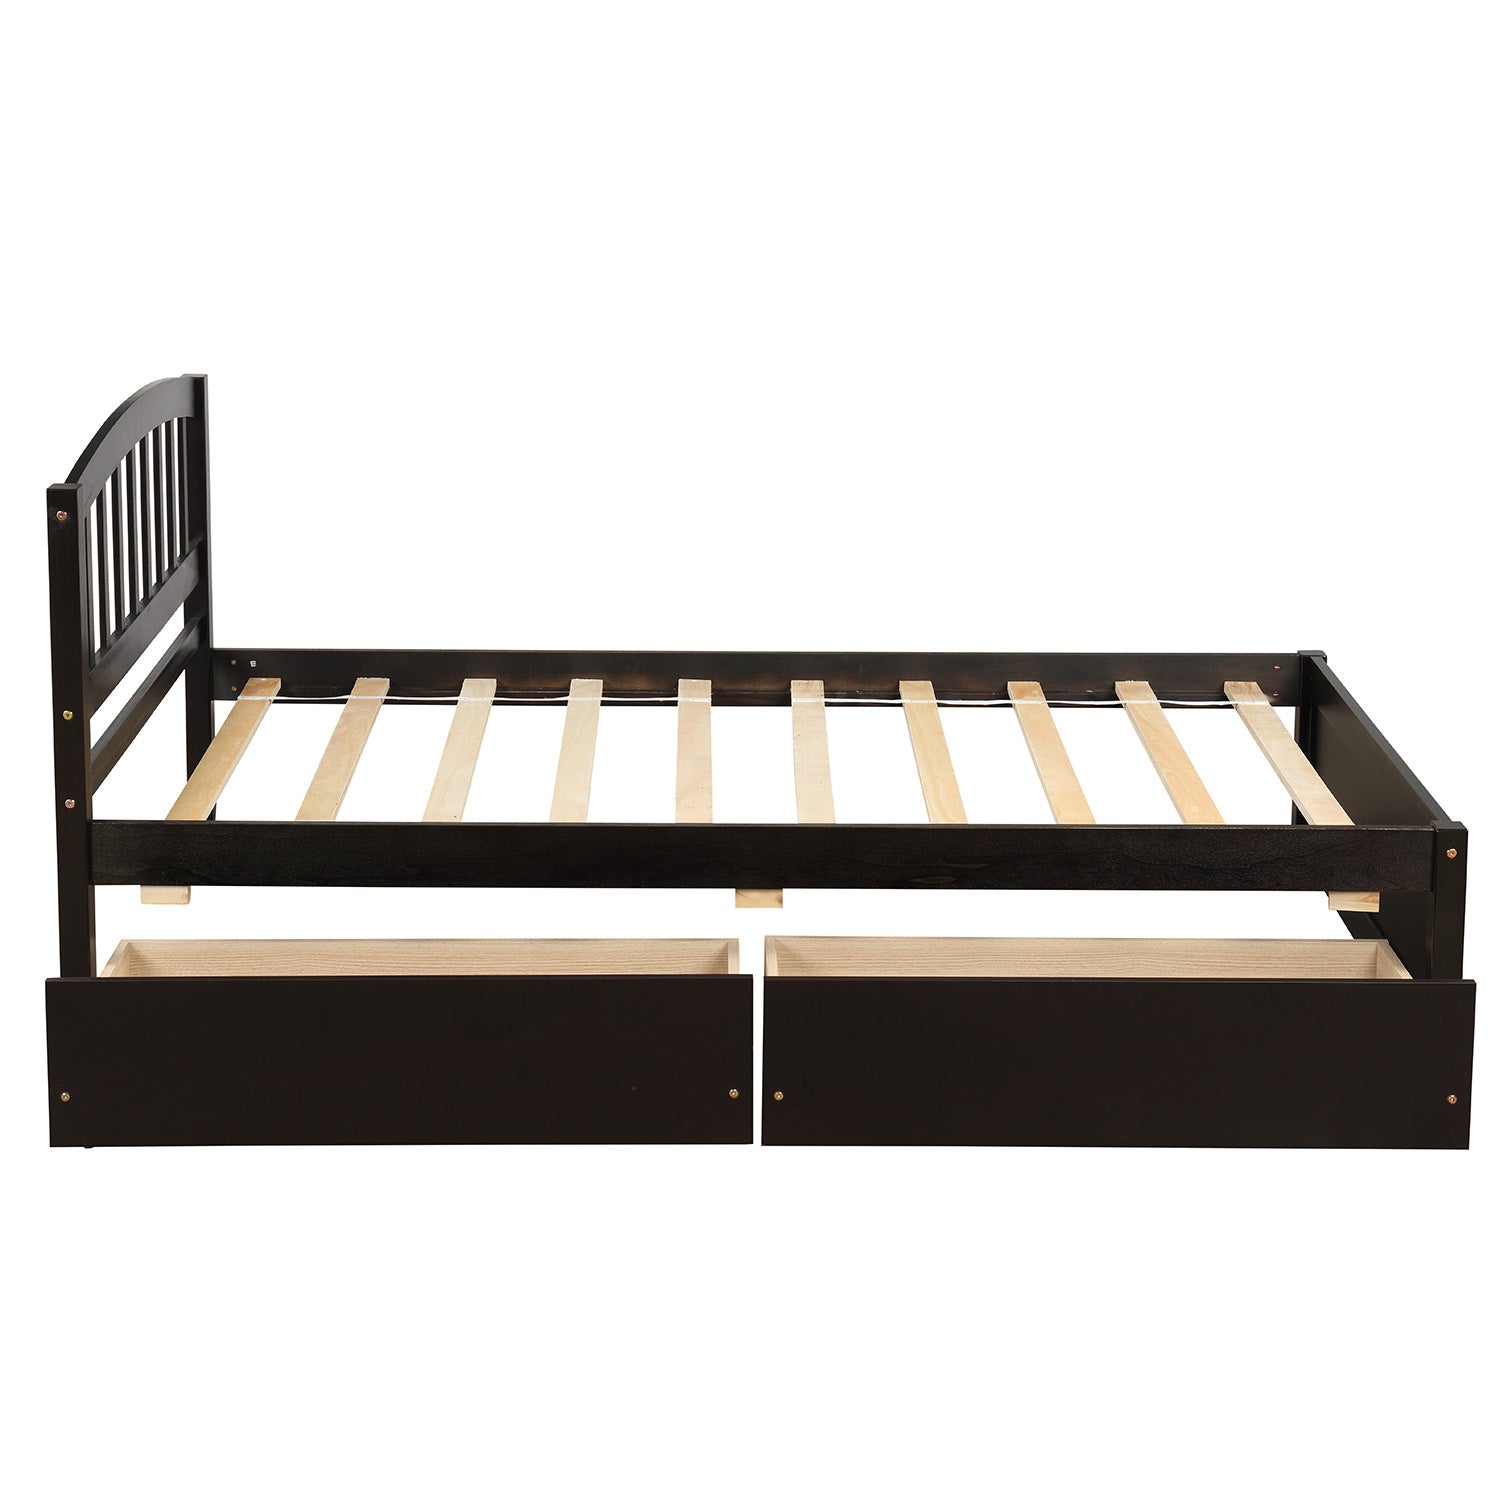 Platform Bed with Storage Drawers, Kids Twin Size Bed Frame No Box Spring Needed, Wood Platform Beds with Headboard and Two Drawers, Modern Single Bed Bedroom Furniture, Espresso, J1164